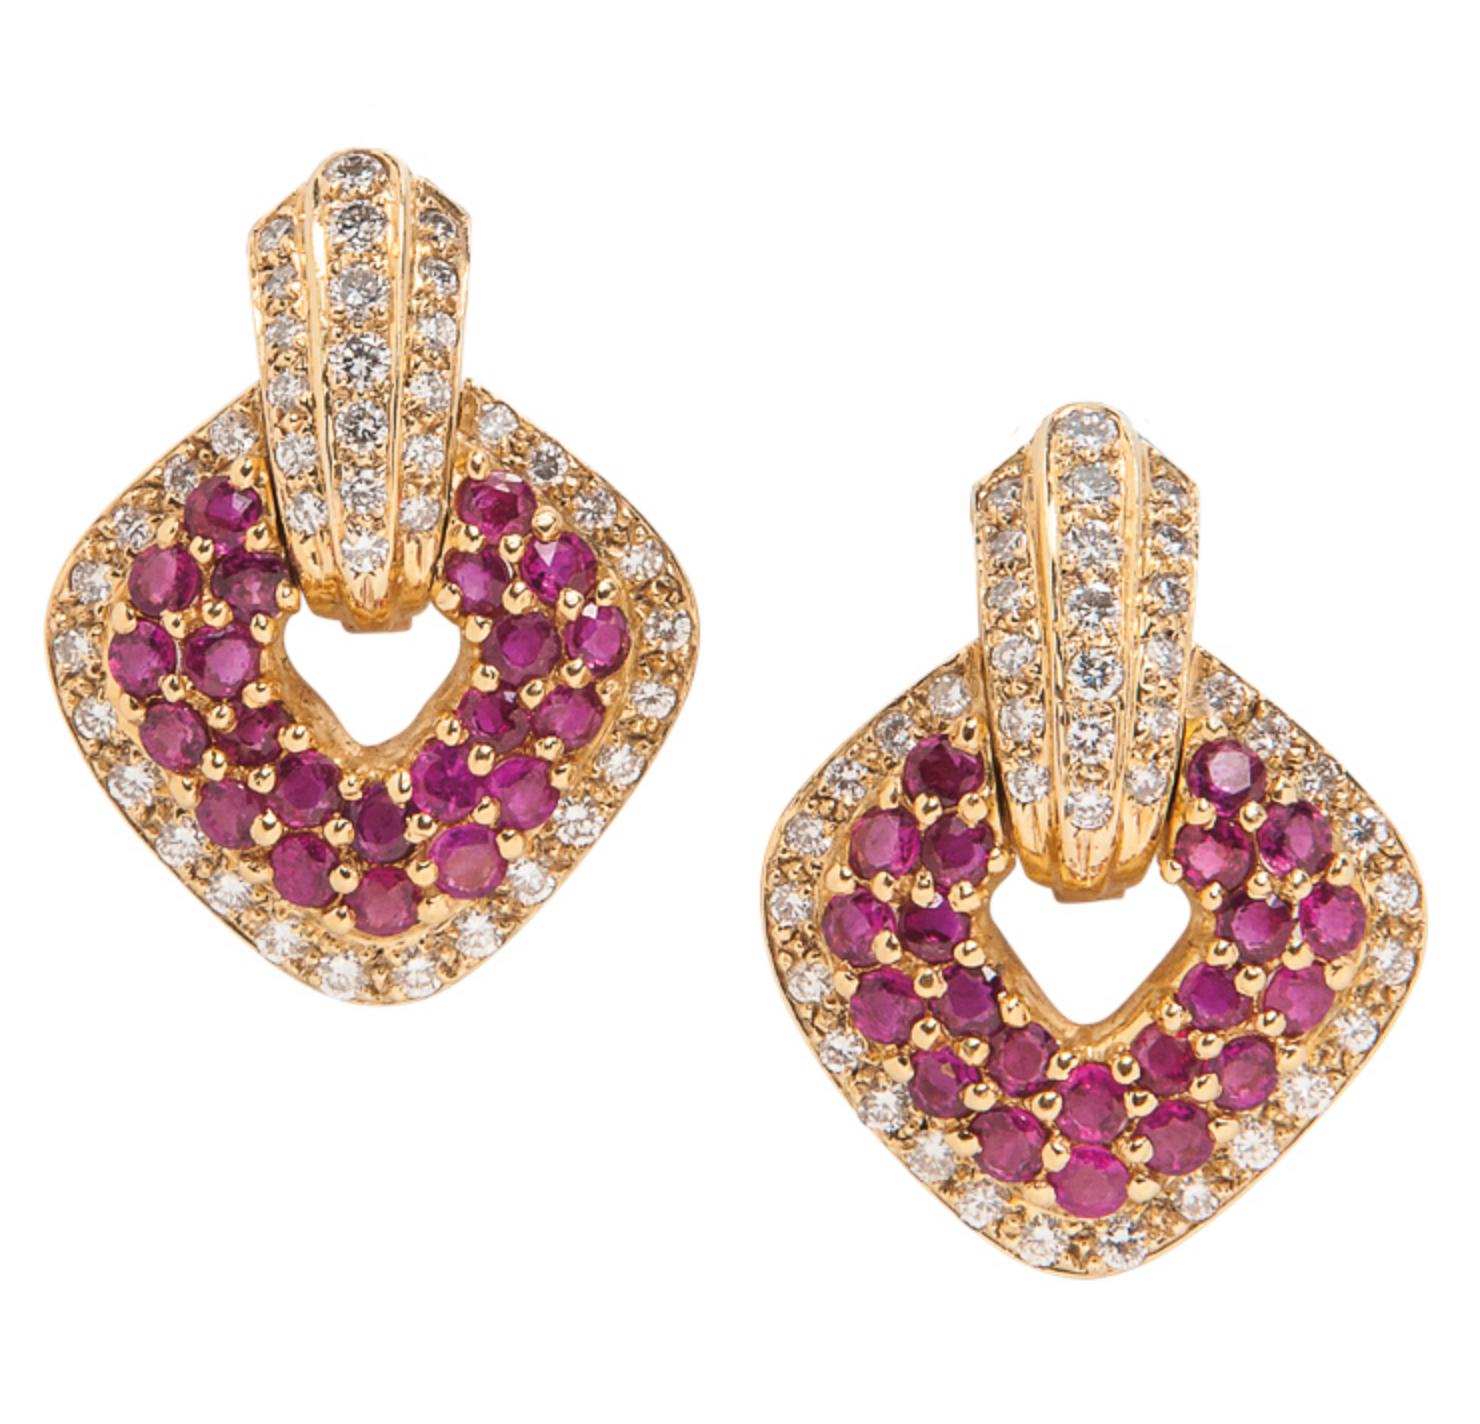 18 karat yellow gold Earrings containing Round Brilliant cut Rubies and approximately 1.80 carats of Full cut Round diamonds.